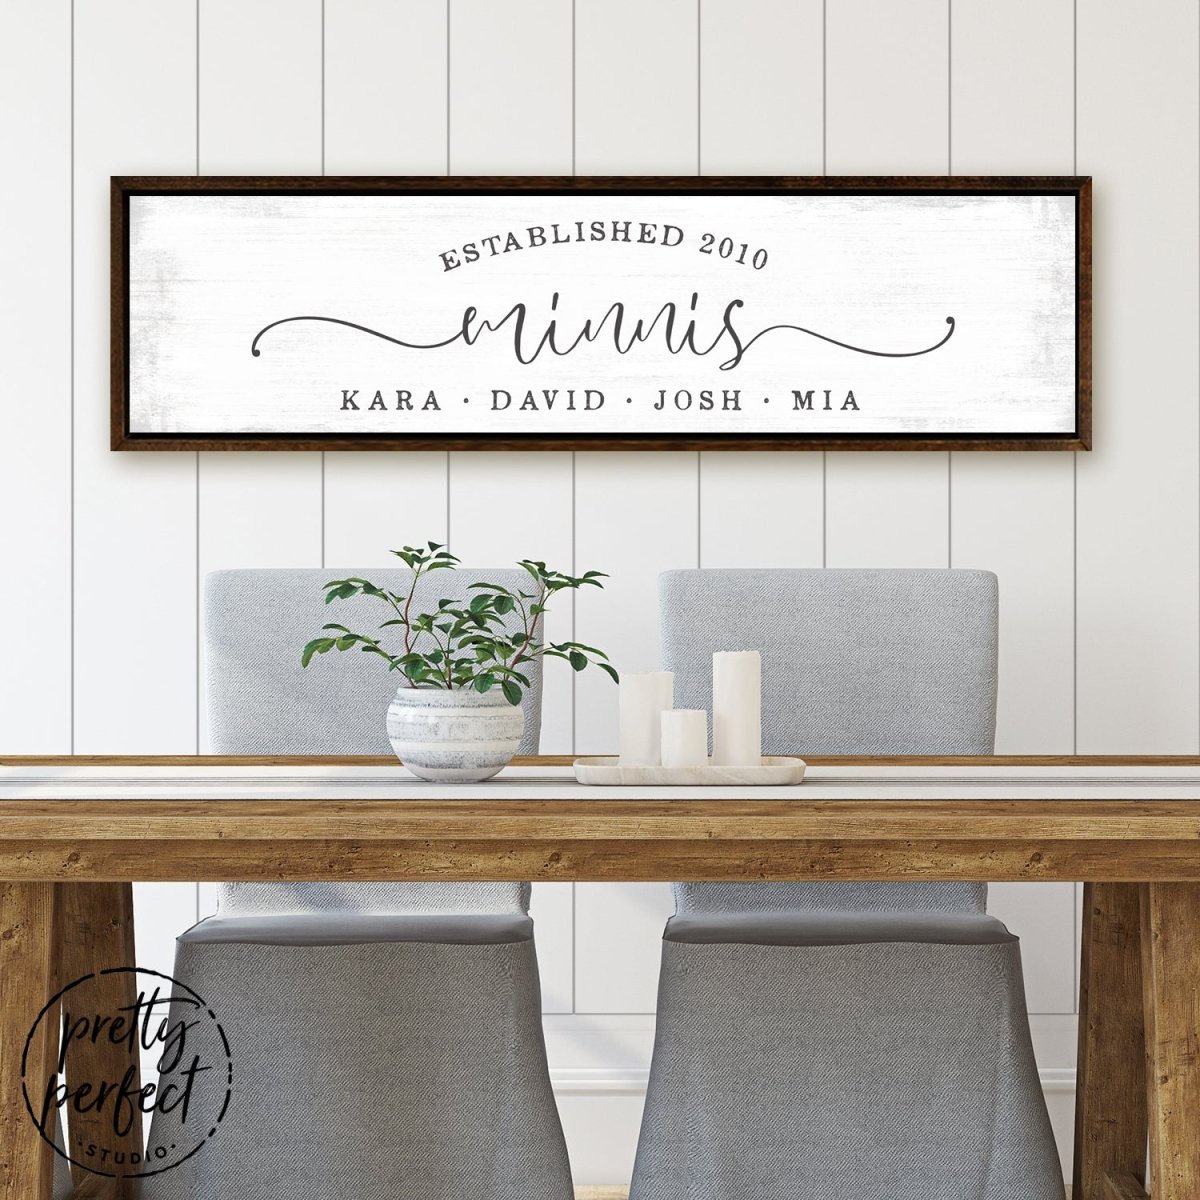 Personalized Family Names Wall Art With Established Date Above Table - Pretty Perfect Studio